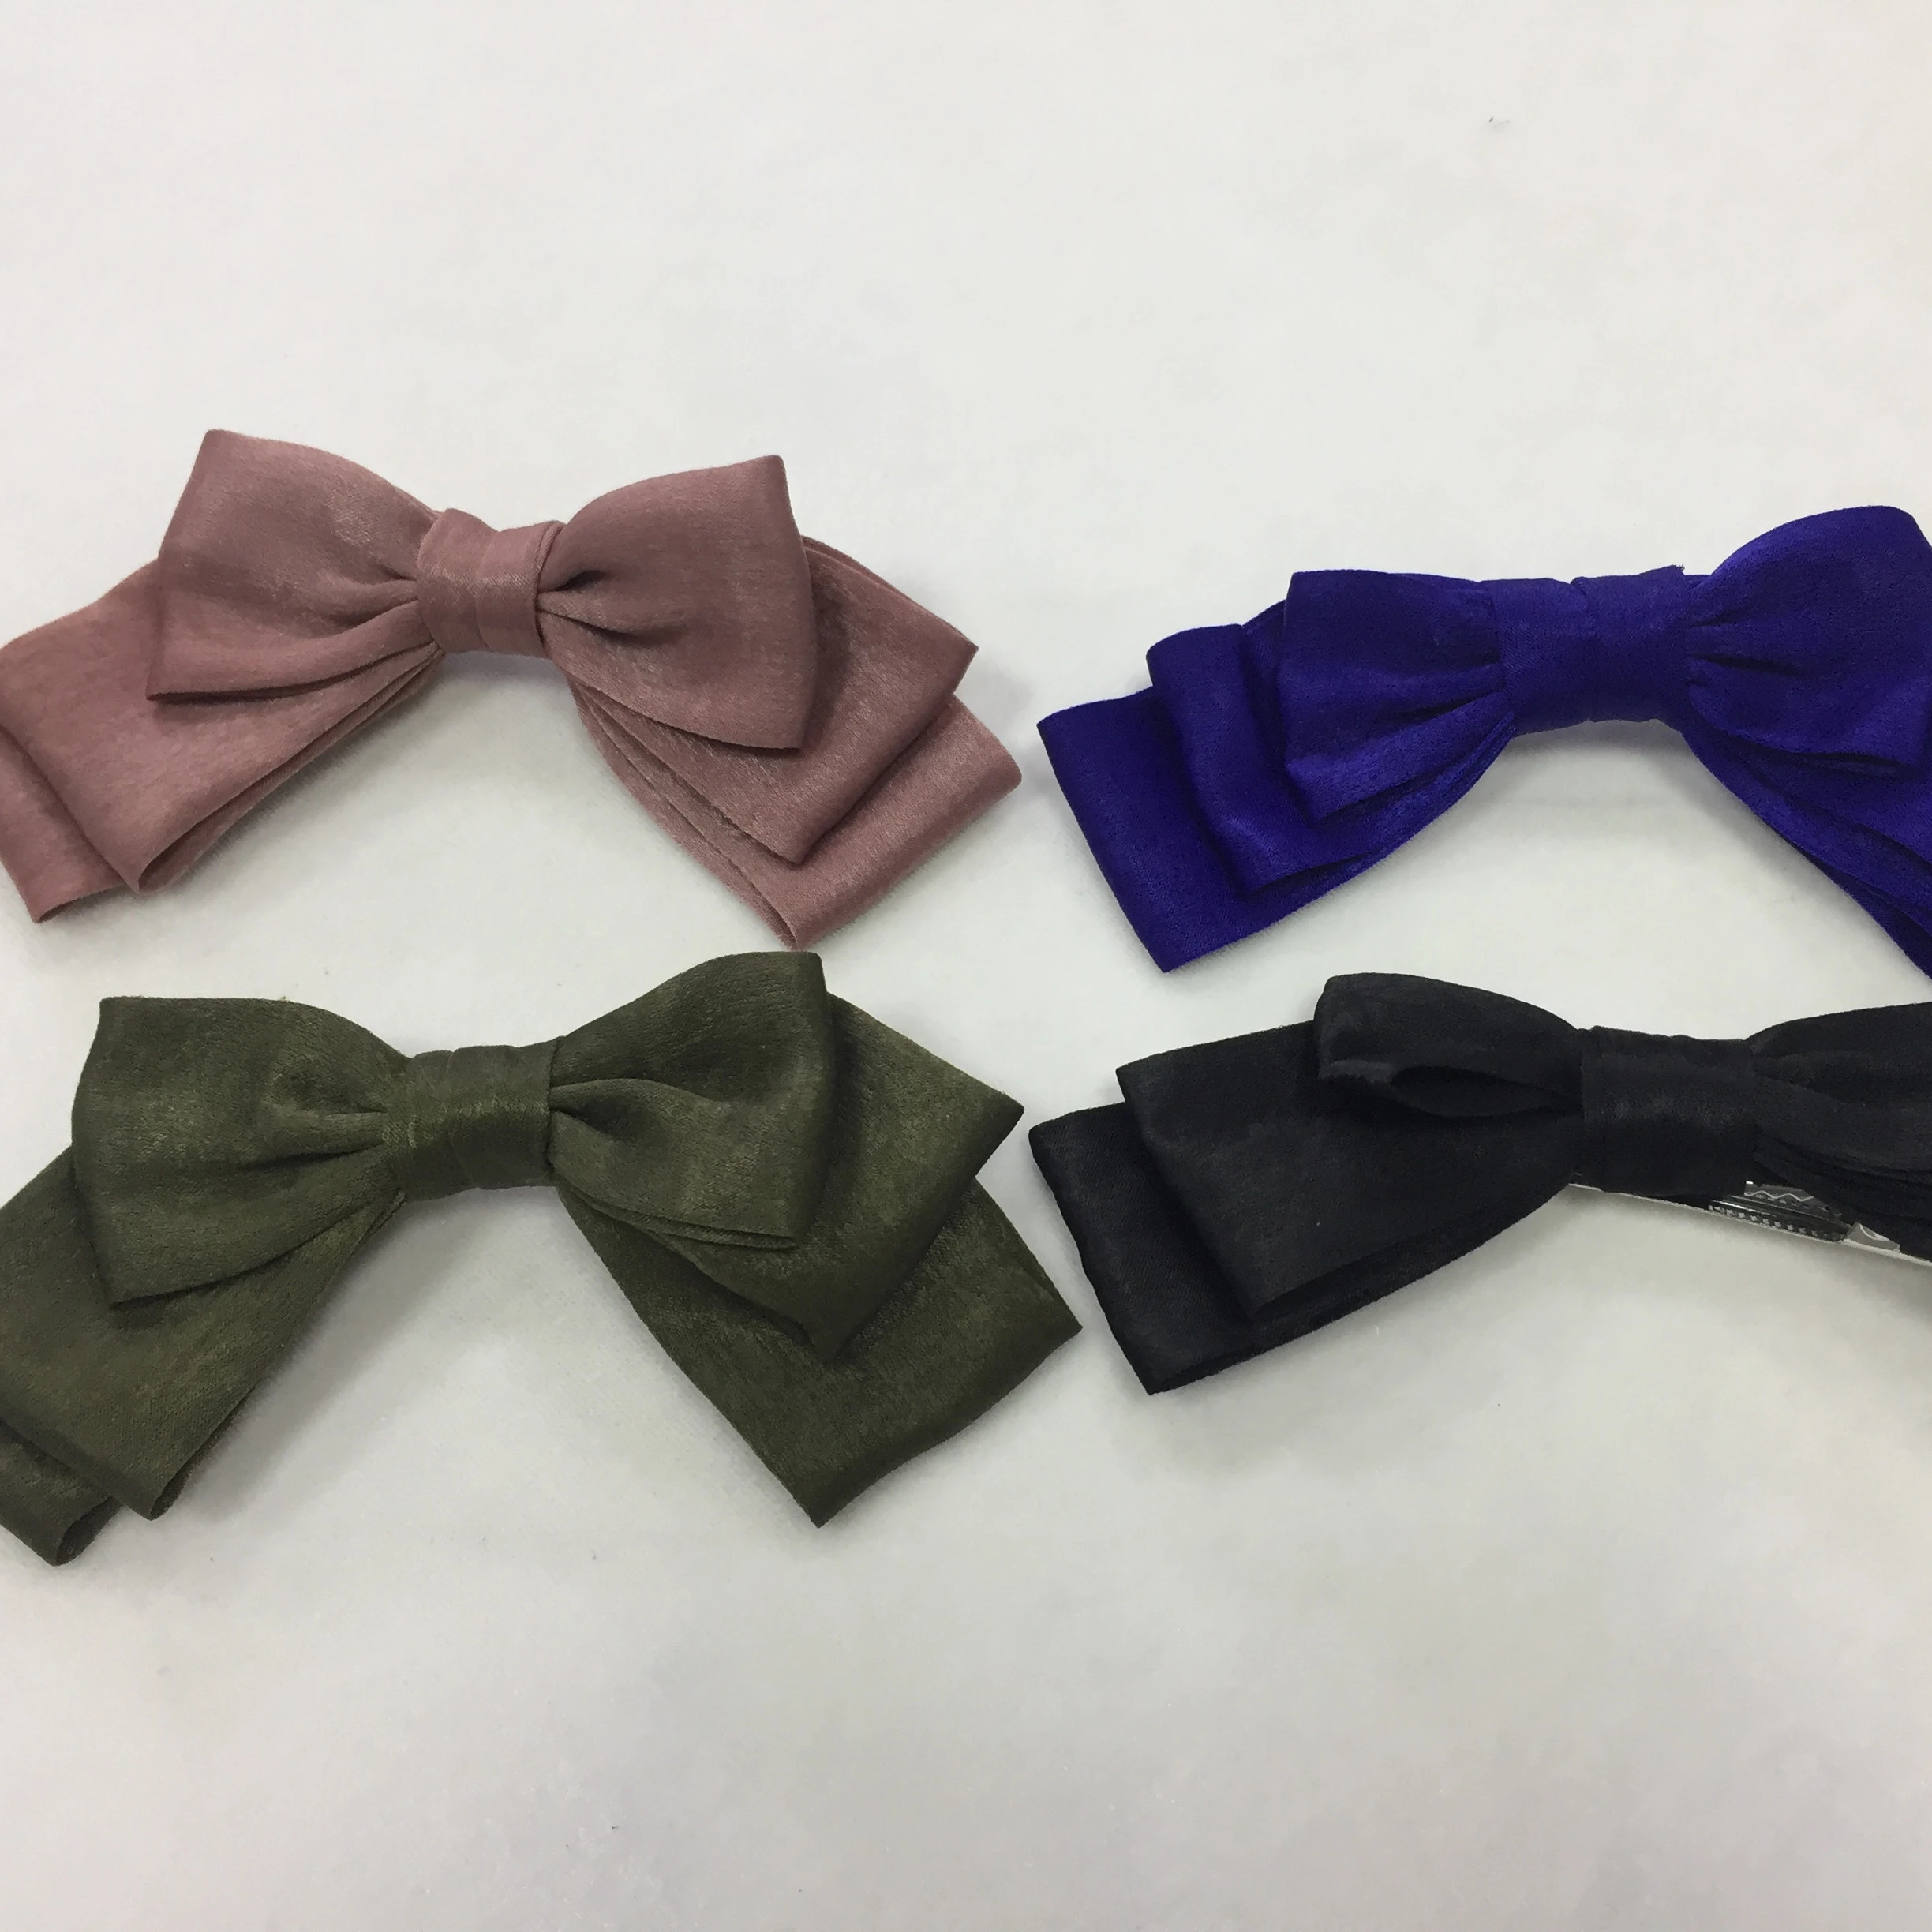 Soild Color Hair Bows with Alligator Hair Clips Grosgrain Ribbon Bow High Quality Boutique Hair Accessories 3 layers bow